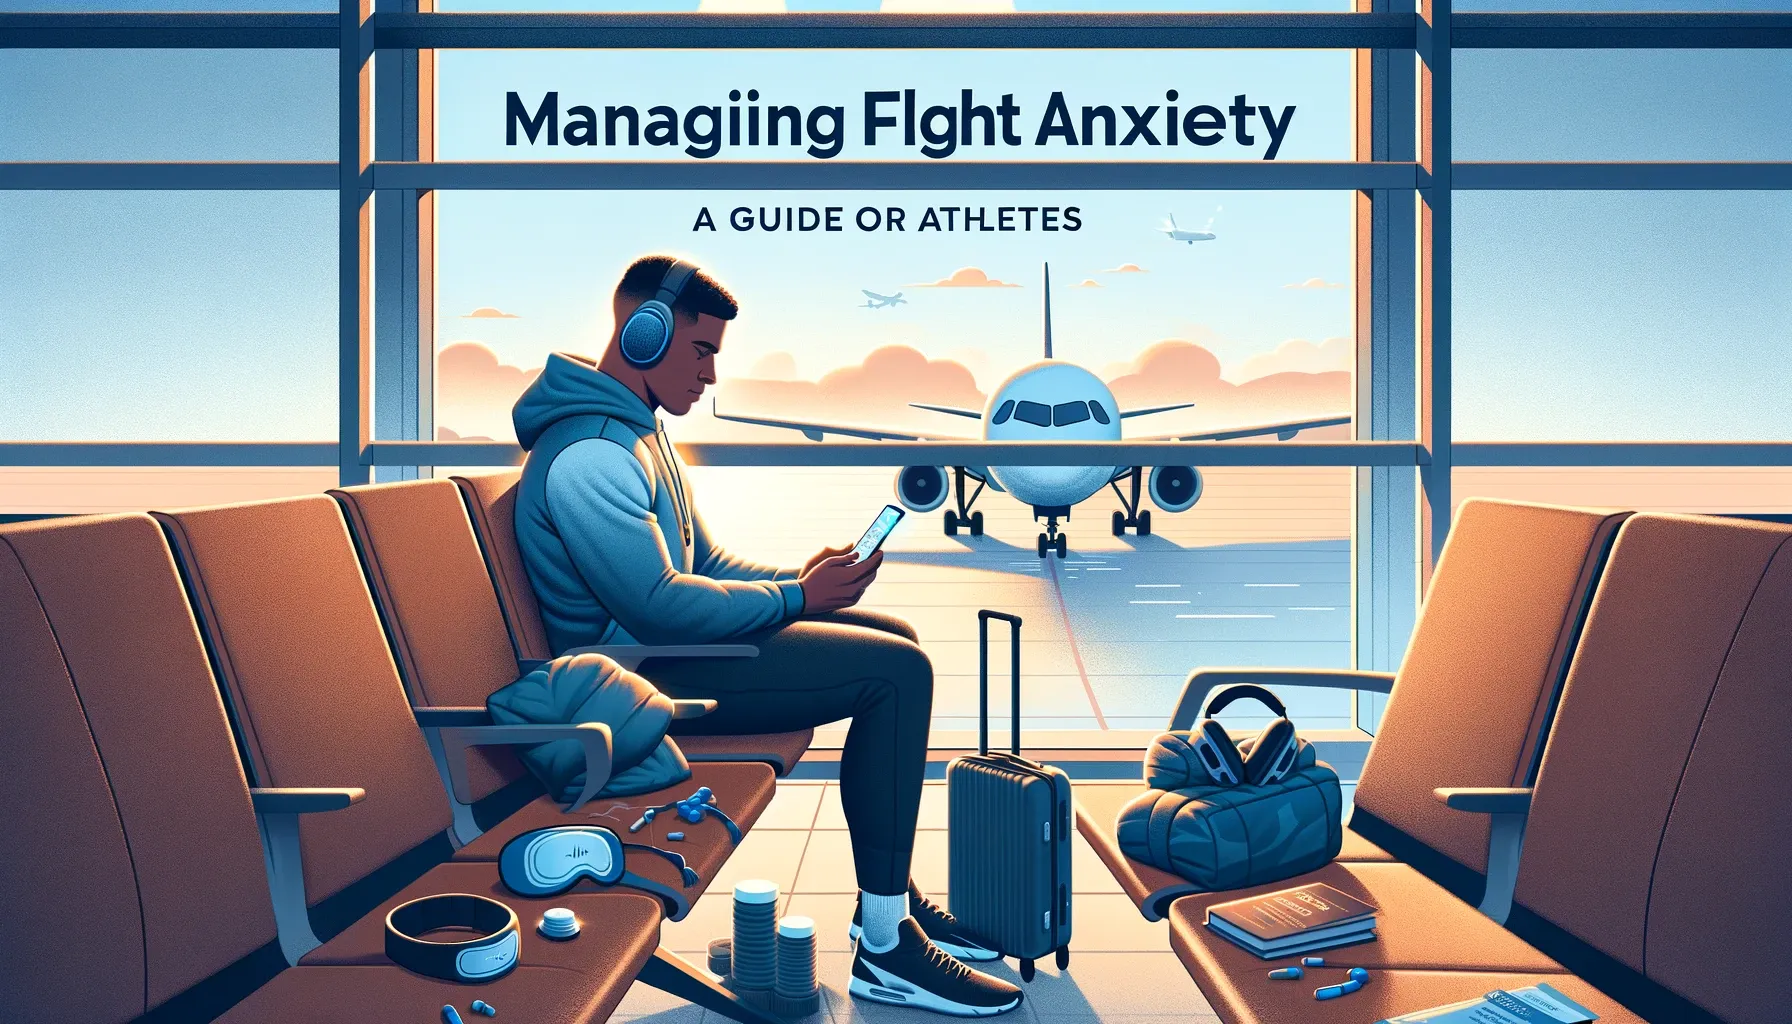 Some Techniques and Tools that Athletes Use to Manage Flight Anxiety